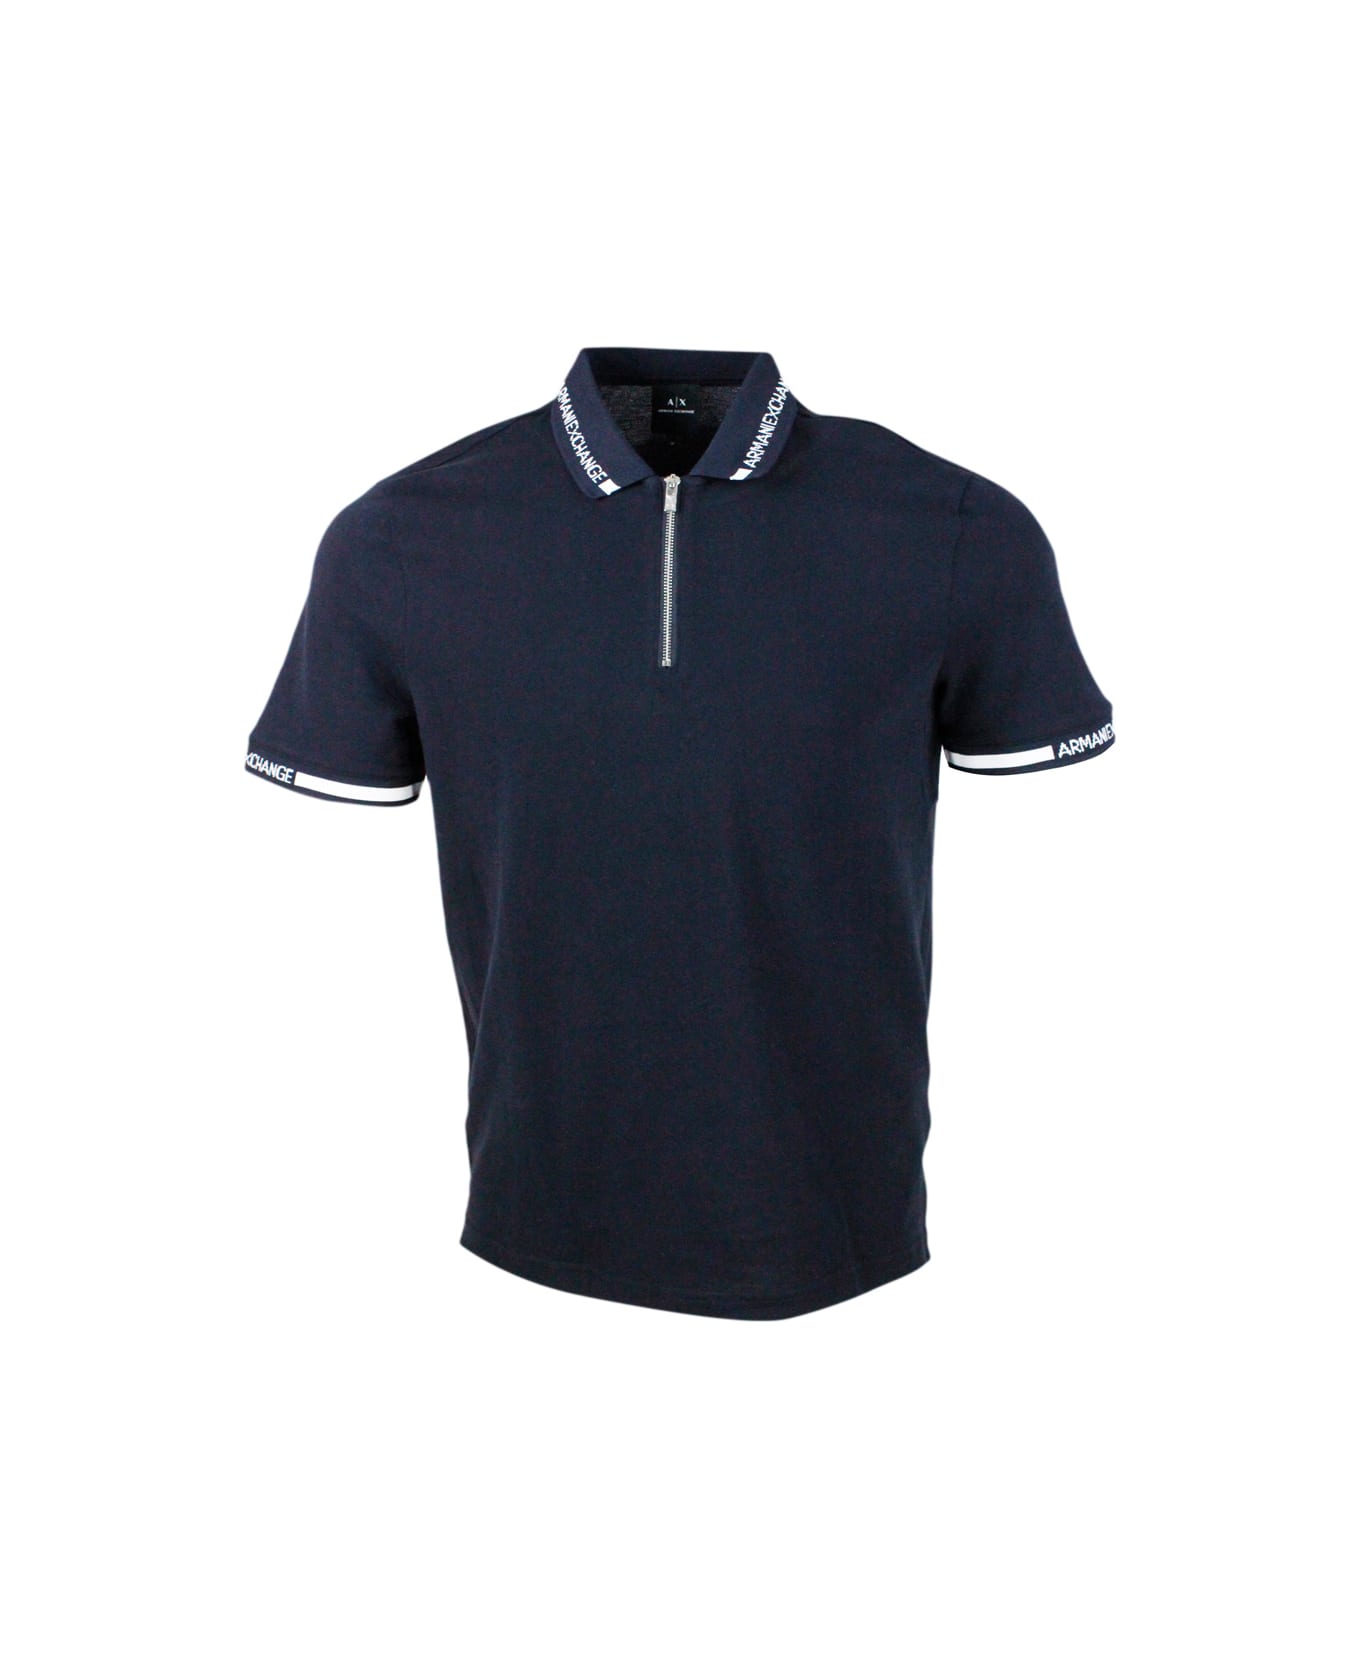 Armani Collezioni Hort-sleeved Pique Cotton Polo Shirt With Zip Closure And Writing On The Collar - Blue ポロシャツ